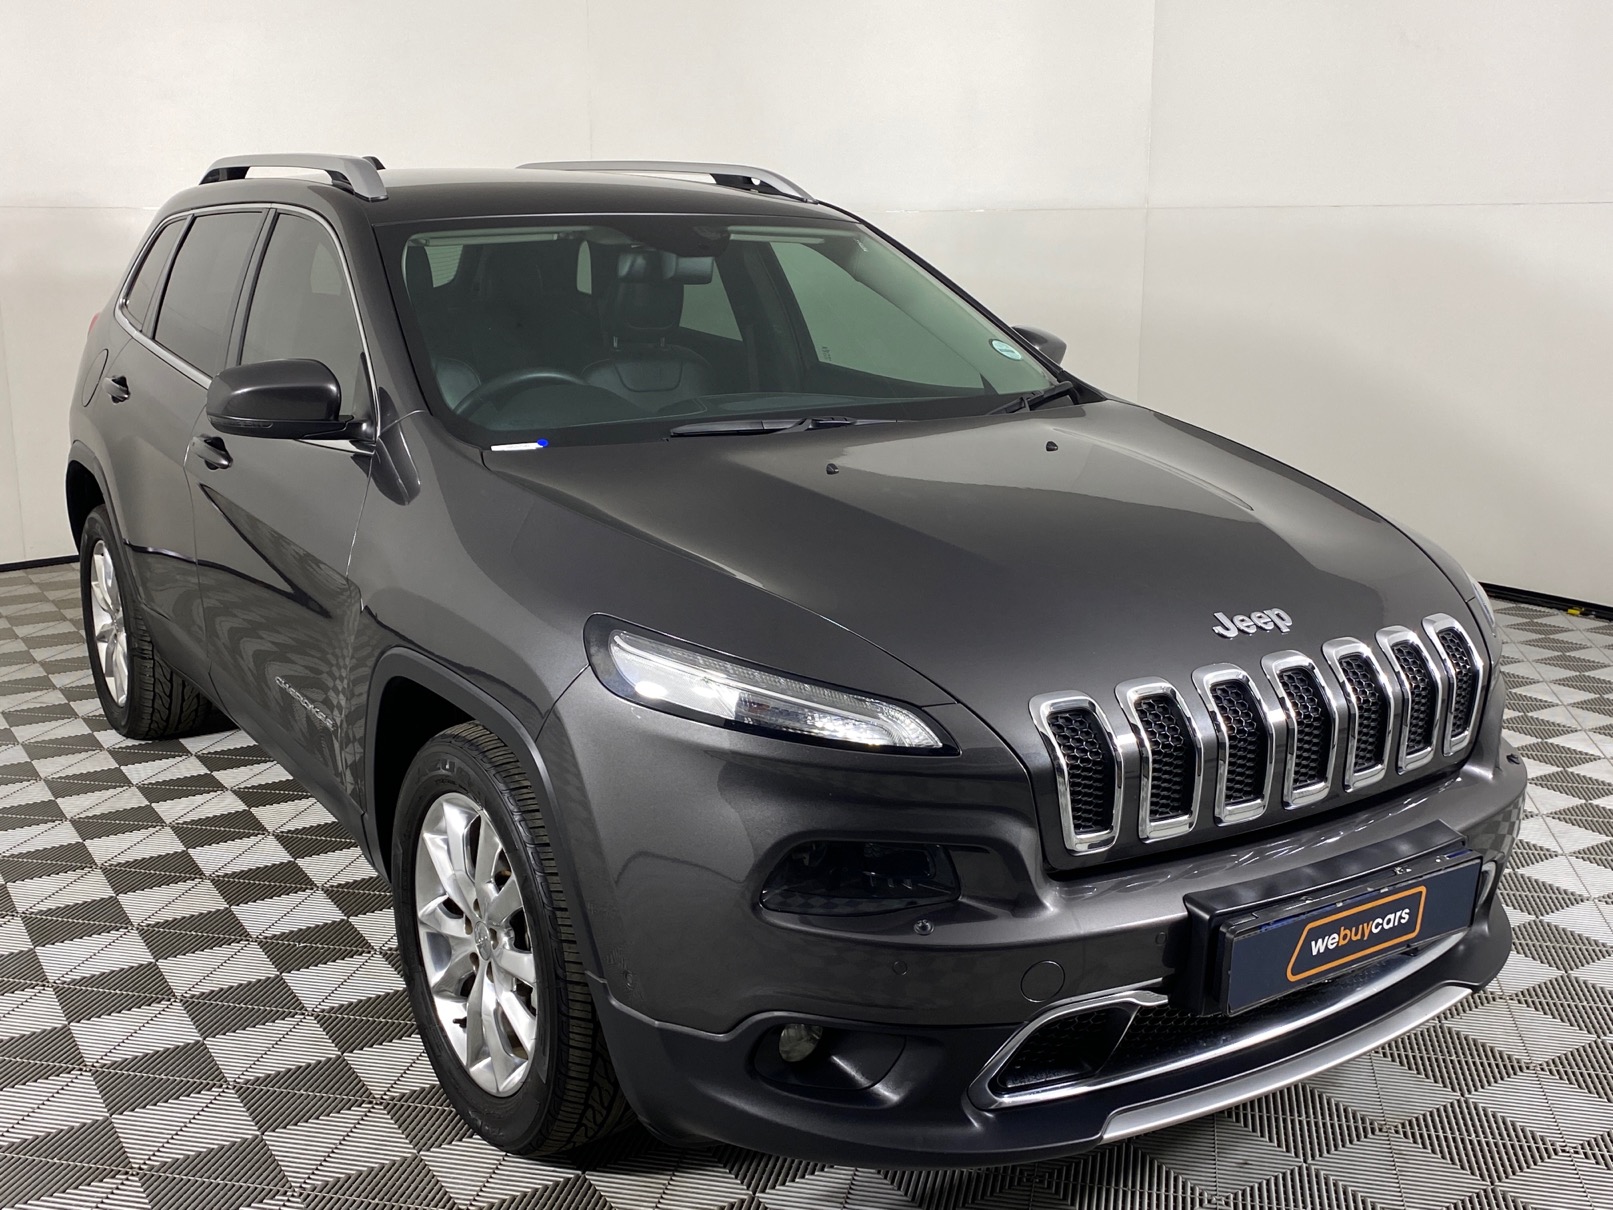 Used 2015 Jeep Cherokee 3.2 Limited Auto for sale WeBuyCars